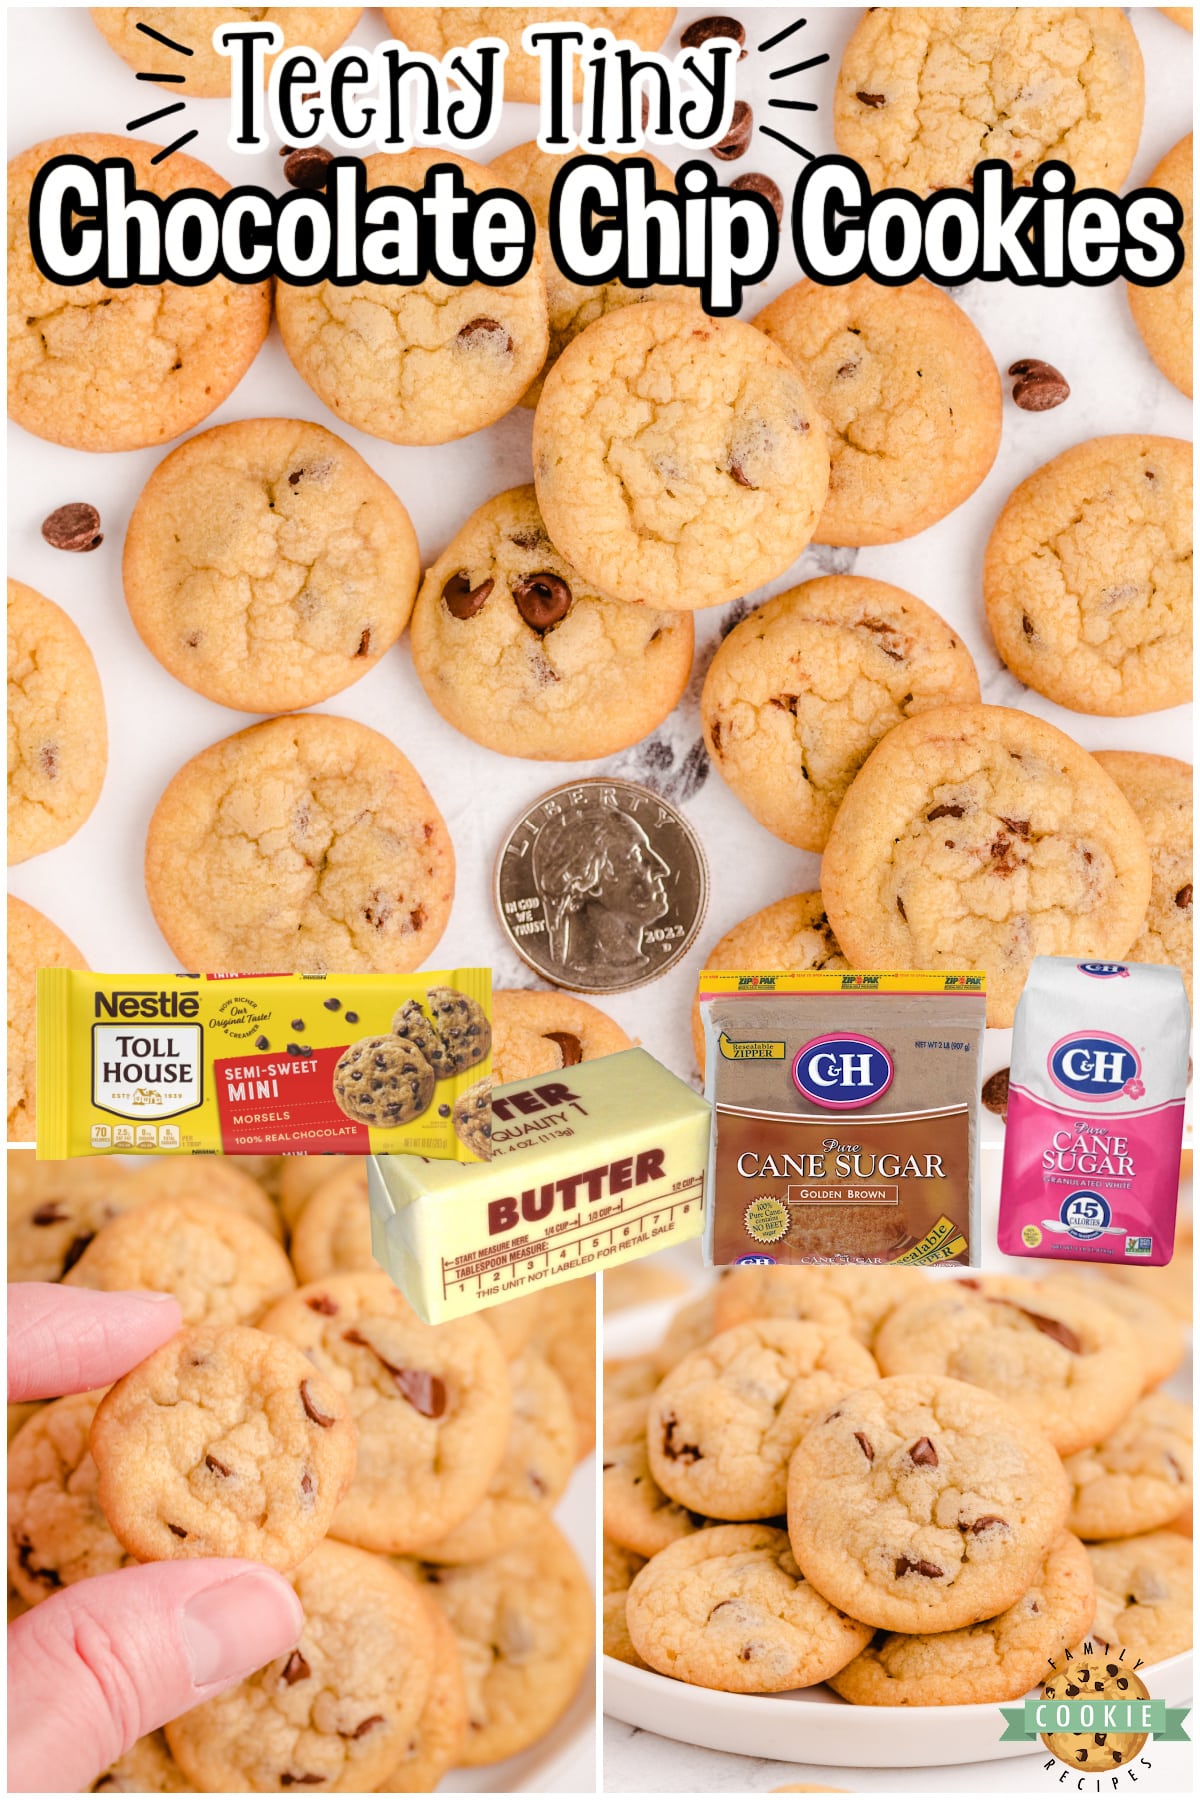 Mini Chocolate Chip Cookies are teeny tiny chocolate chip cookies the size of a quarter! Soft, chewy poppable cookies perfect for parties!